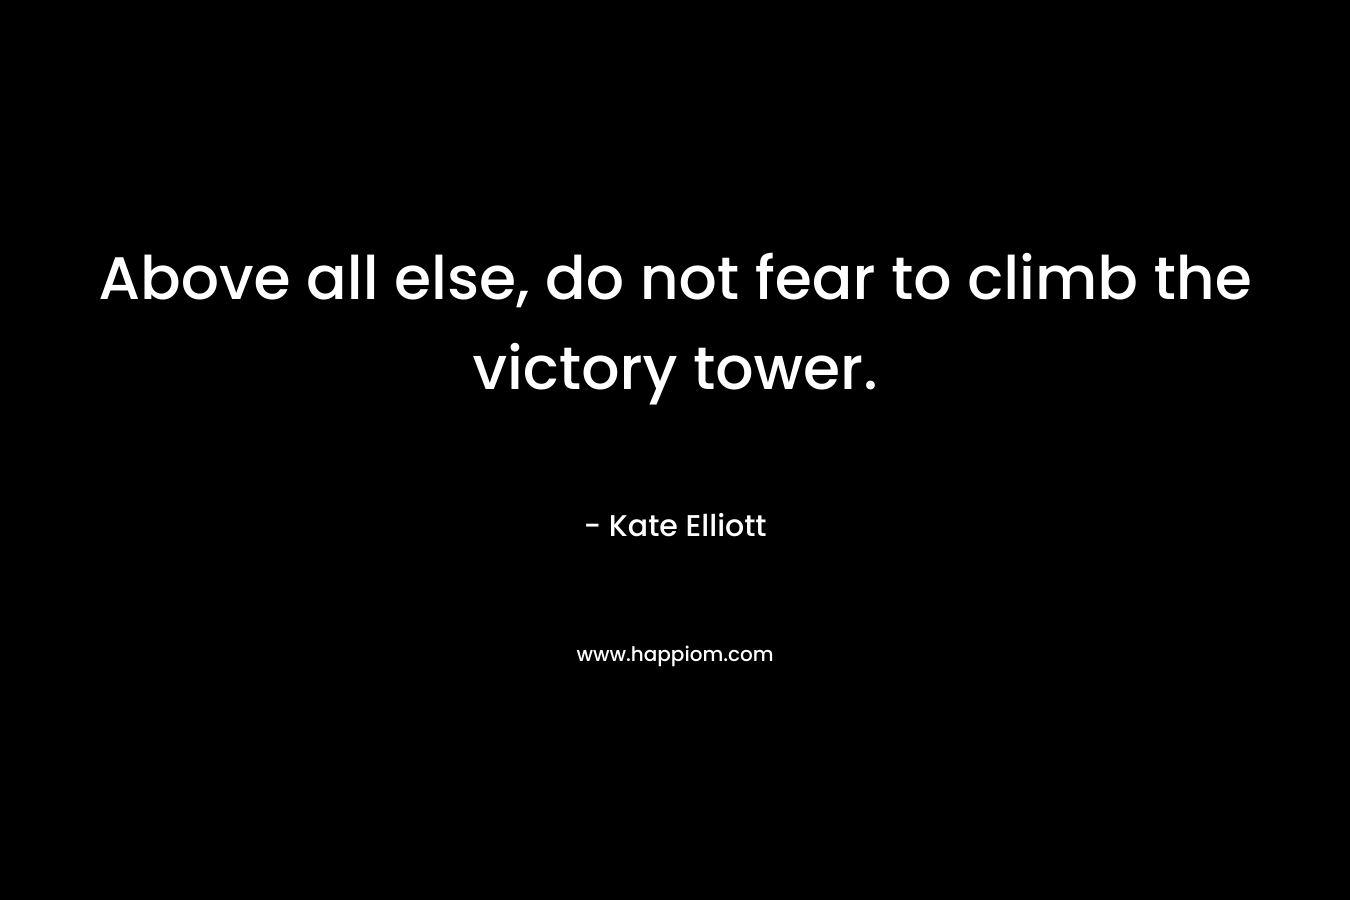 Above all else, do not fear to climb the victory tower.